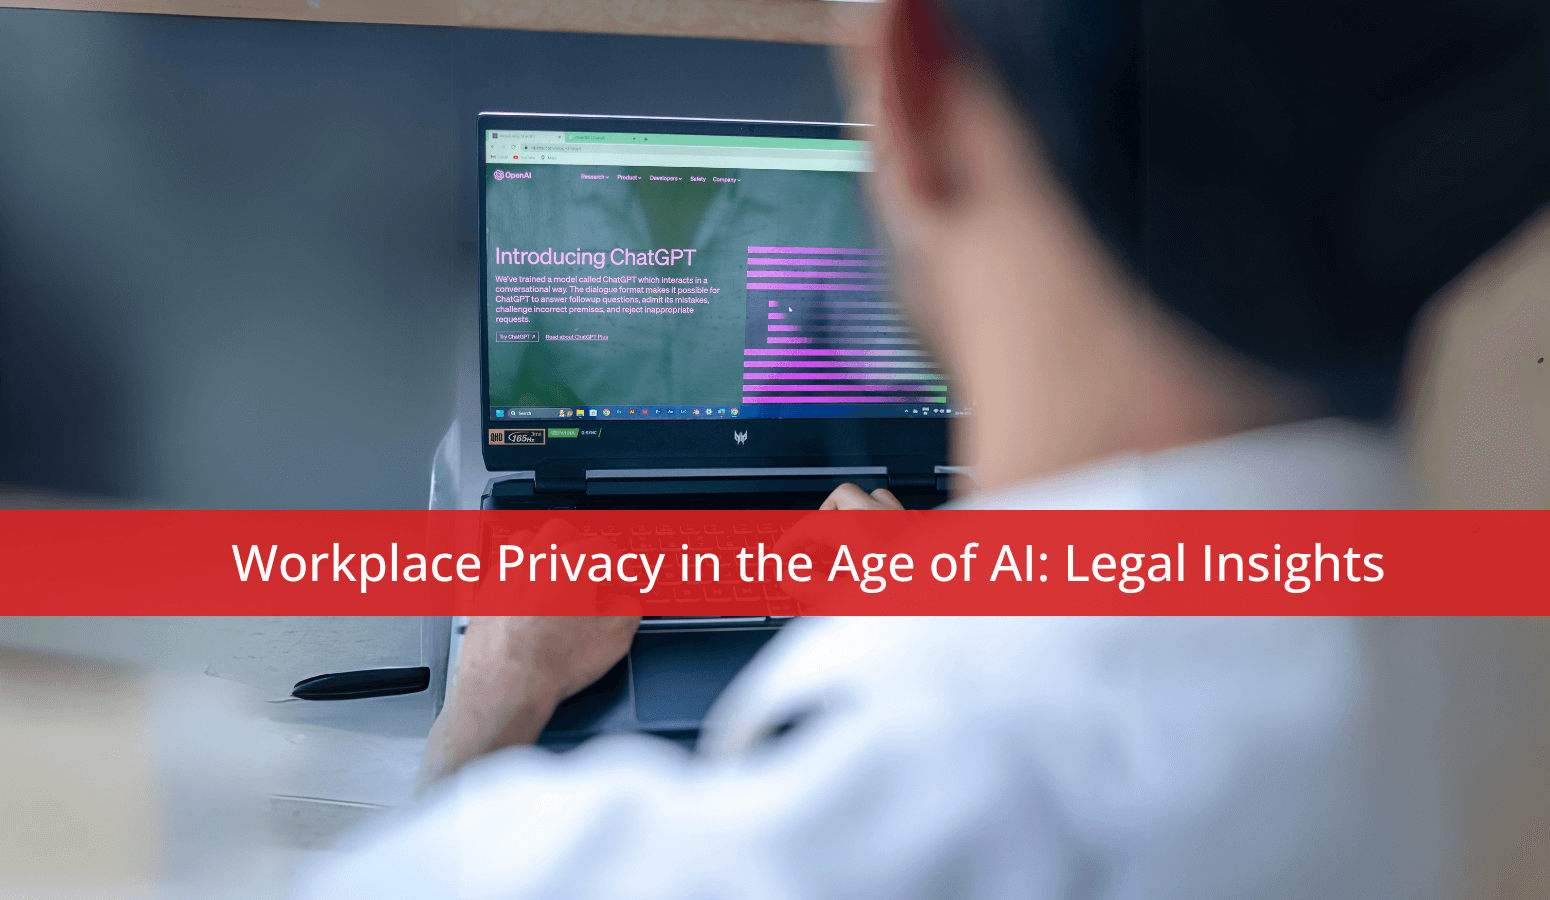 Featured image for “Workplace Privacy in the Age of AI: Legal Insights”